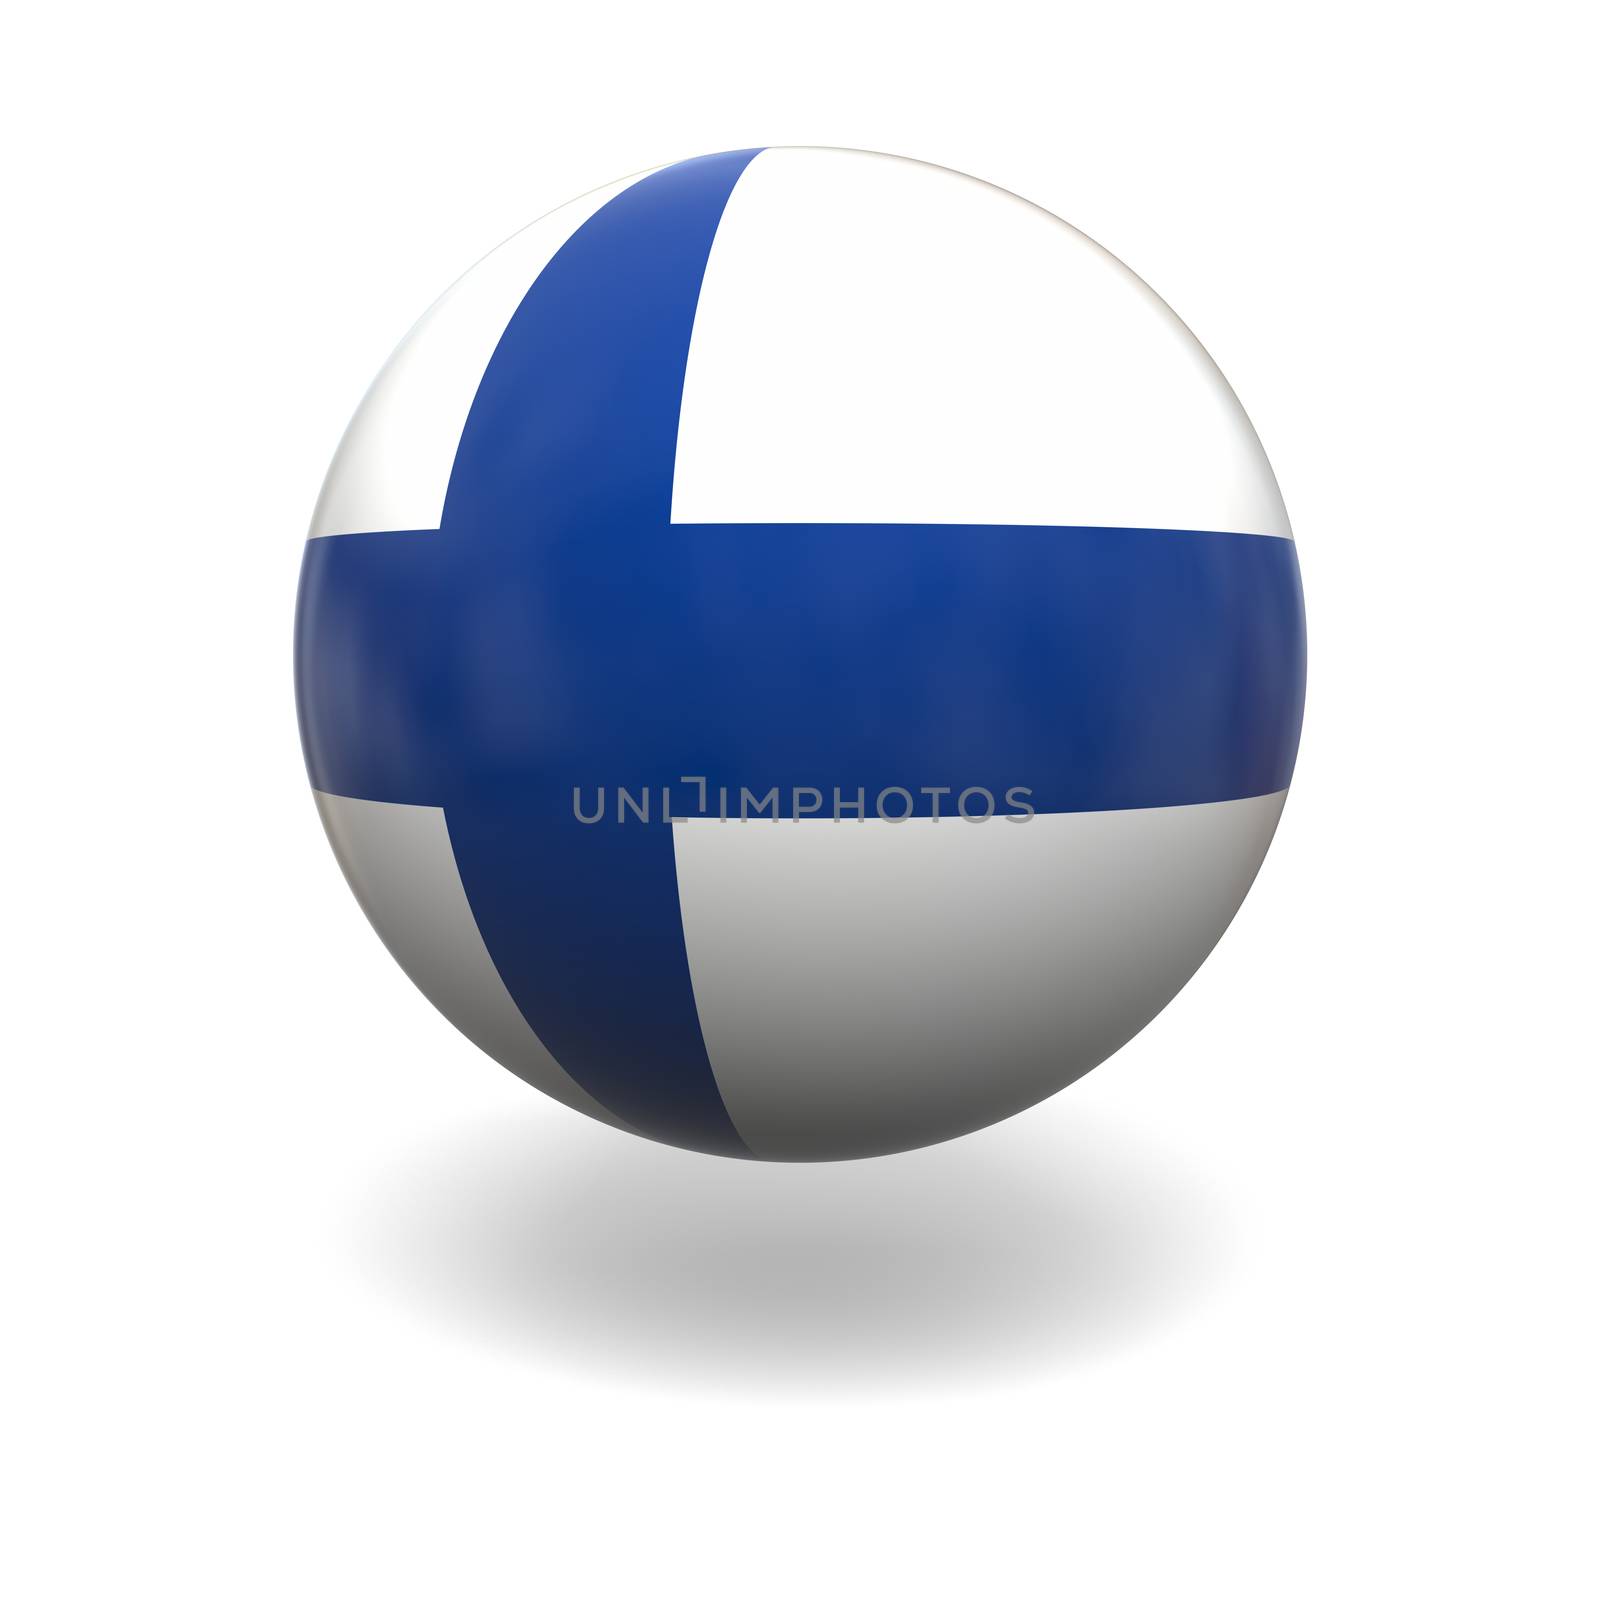 National flag of Finland on sphere isolated on white background